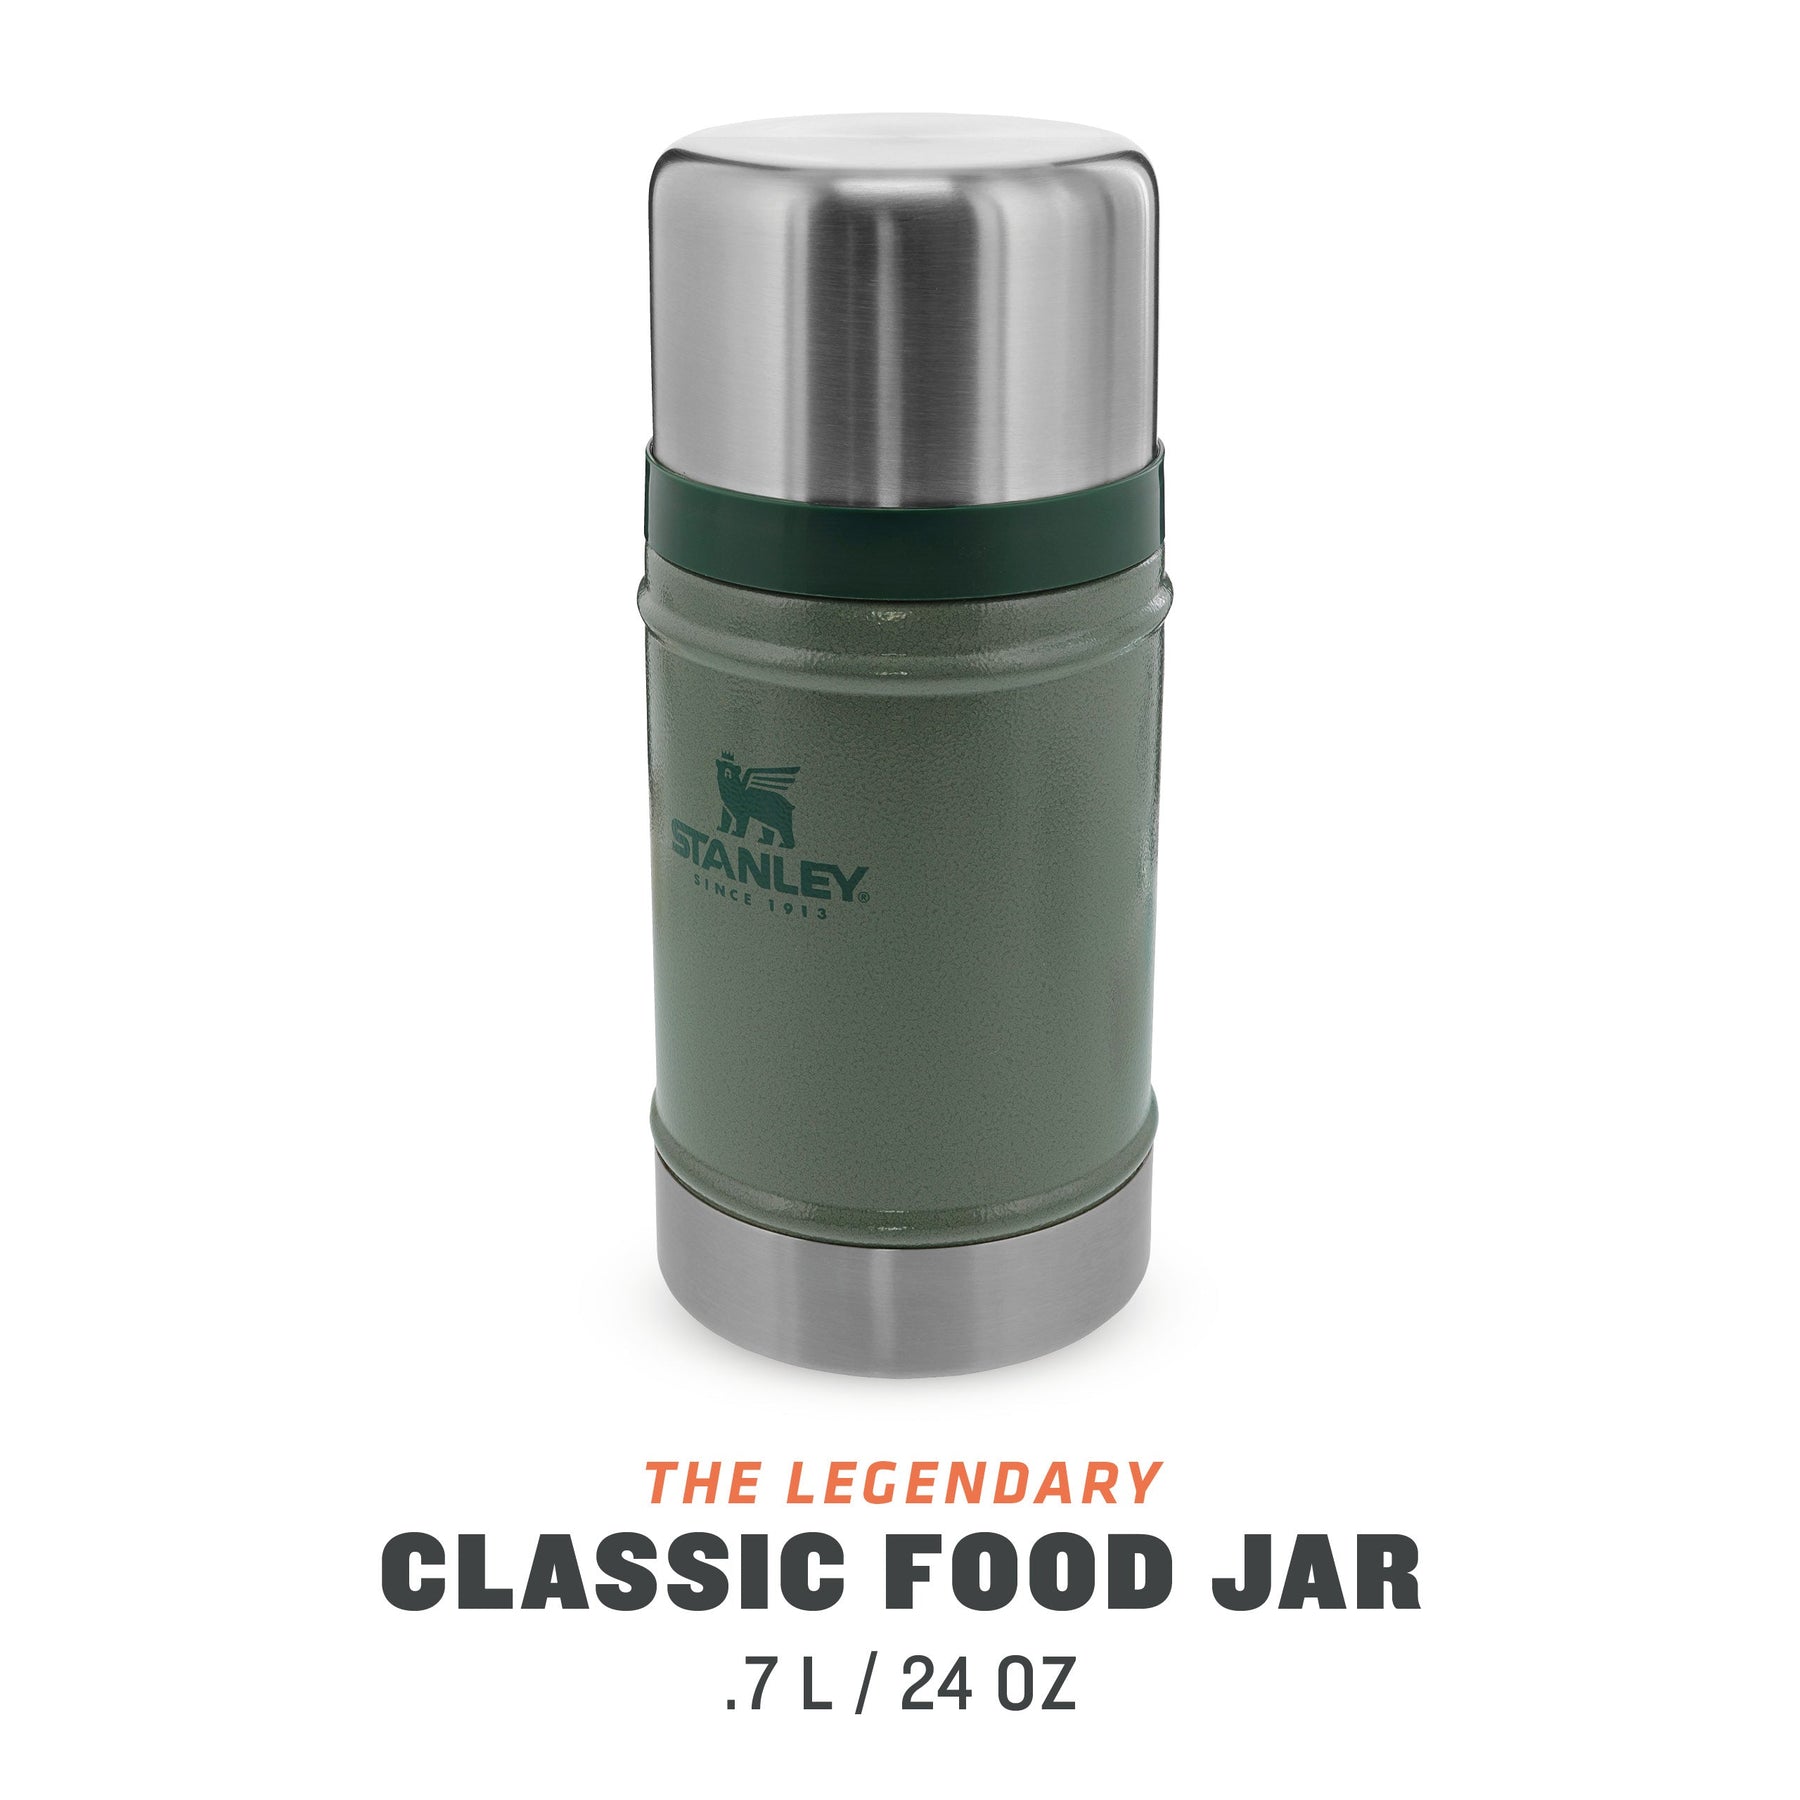 Dropship Stanley Classic Legendary Vacuum Insulated Stainless Steel Food  Jar 24 Oz - Hammertone Green to Sell Online at a Lower Price